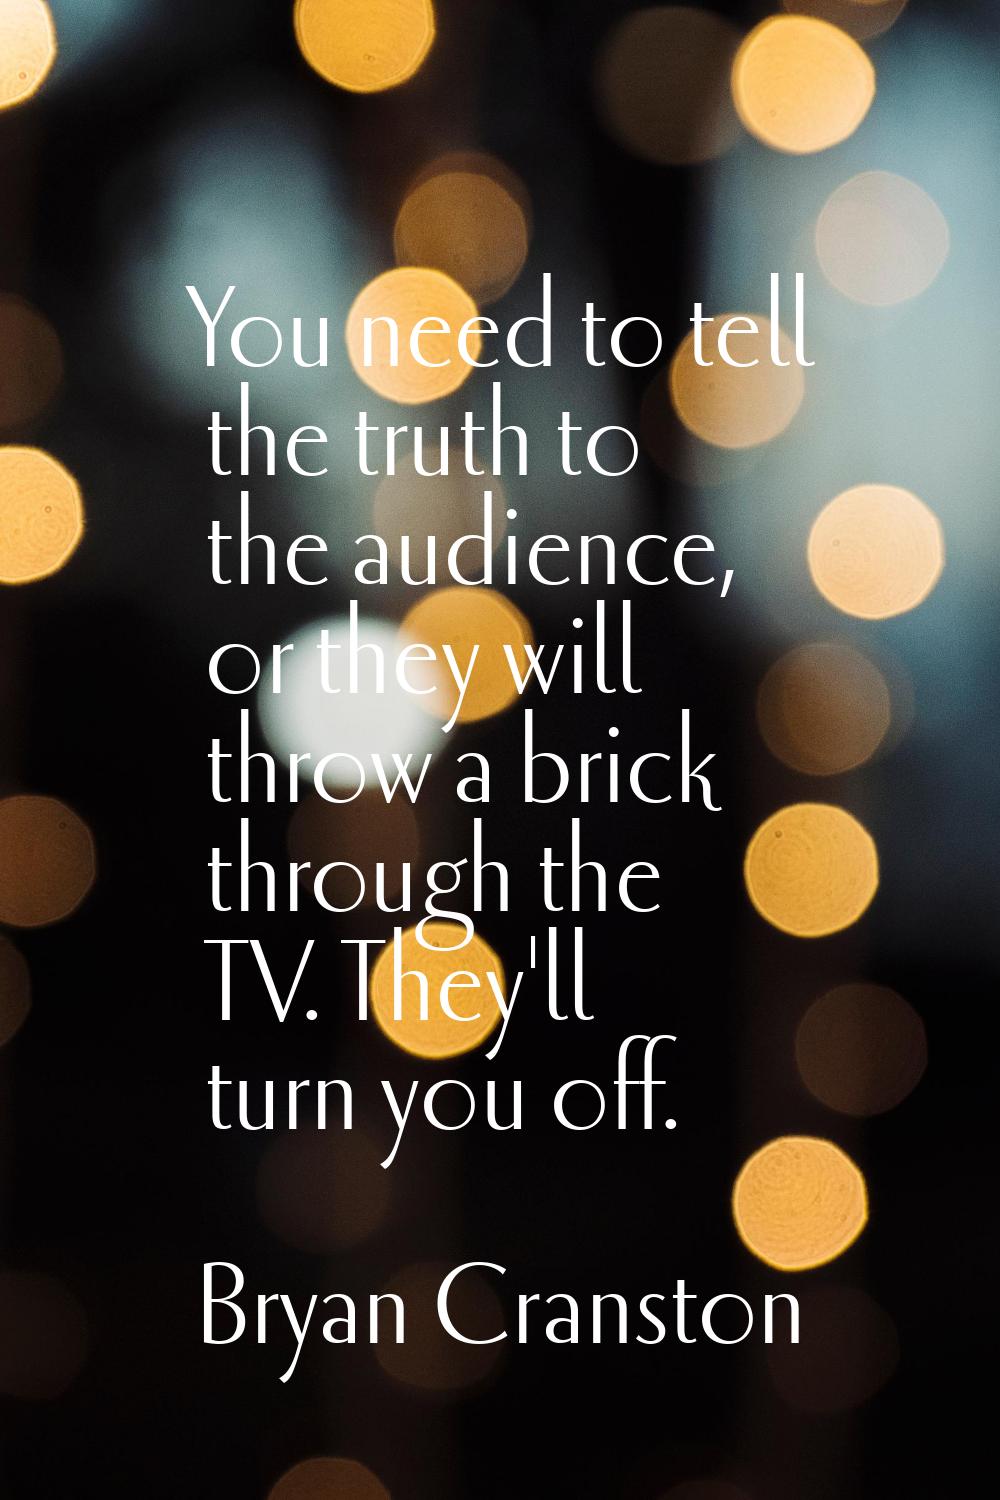 You need to tell the truth to the audience, or they will throw a brick through the TV. They'll turn